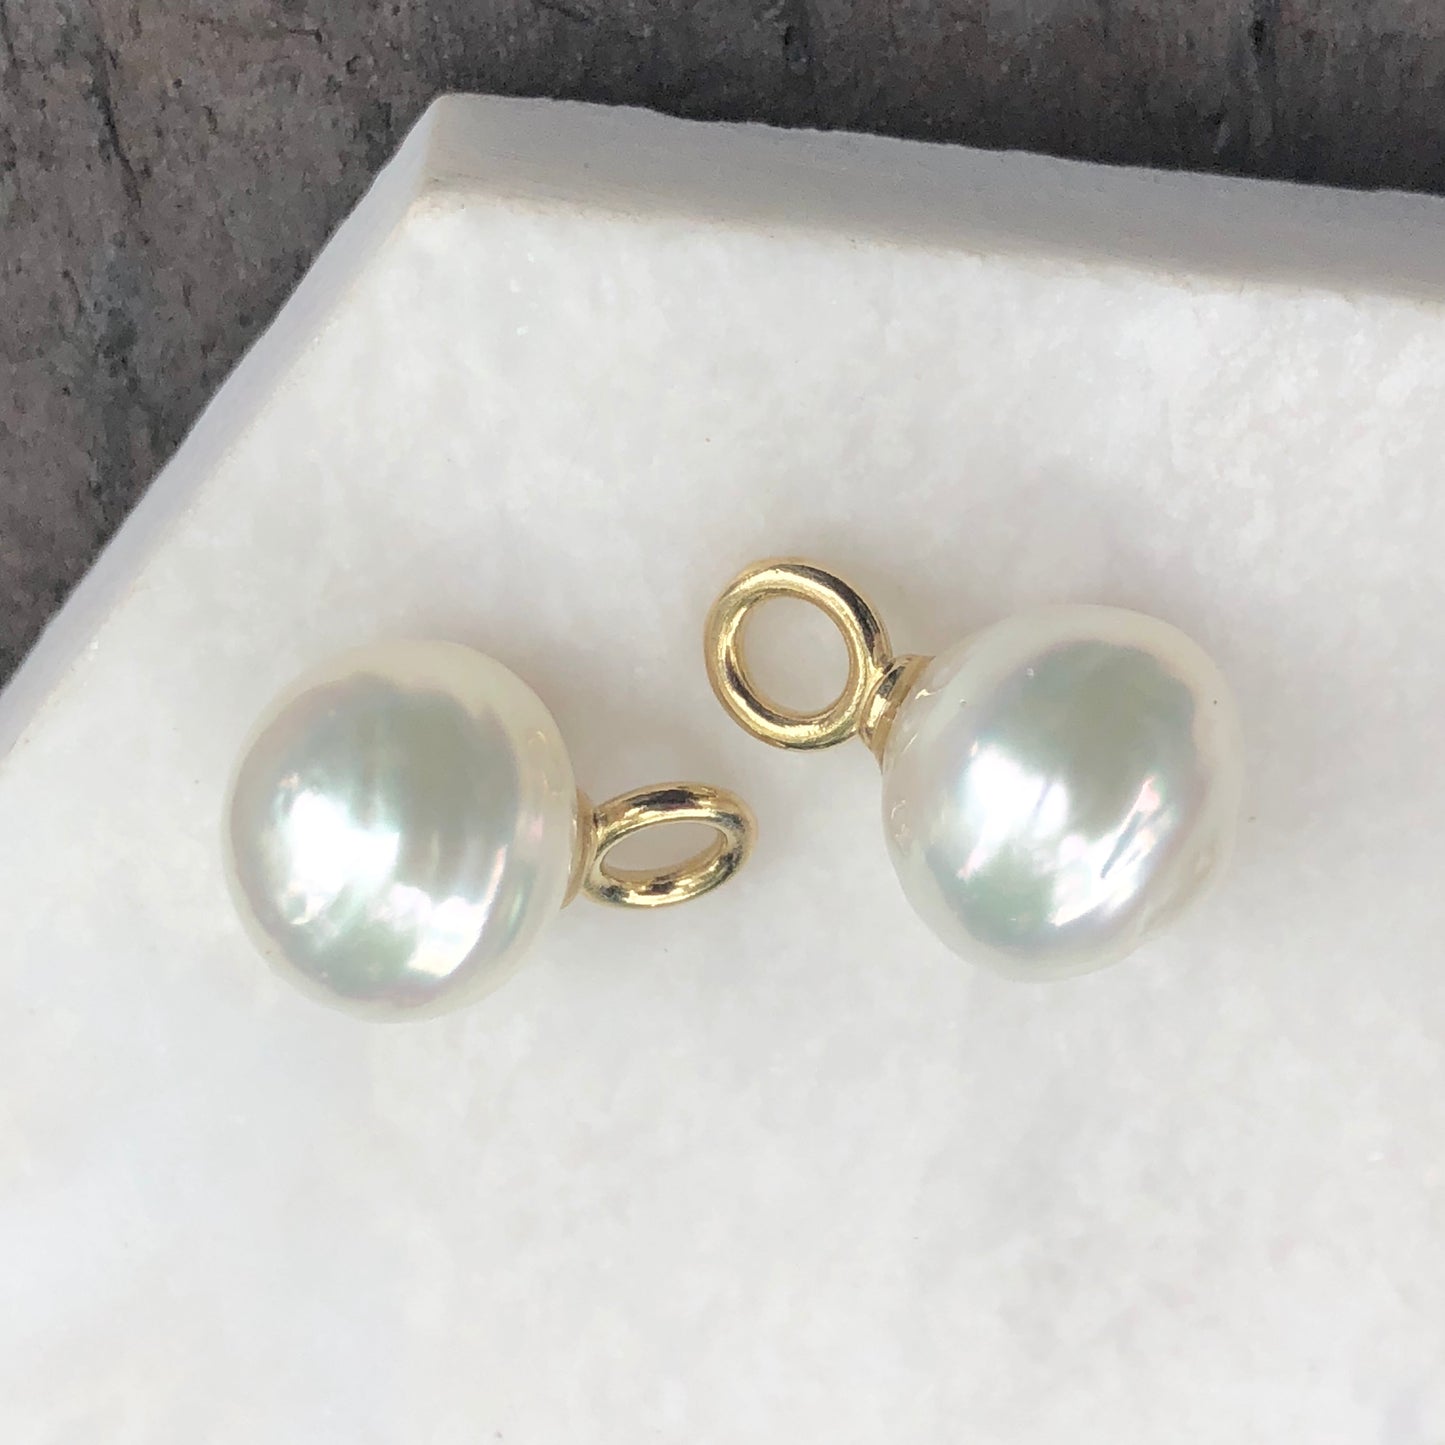 14KT Yellow Gold Paspaley South Sea Pearl Earring Charms 12mm, 14KT Yellow Gold Paspaley South Sea Pearl Earring Charms 12mm - Legacy Saint Jewelry